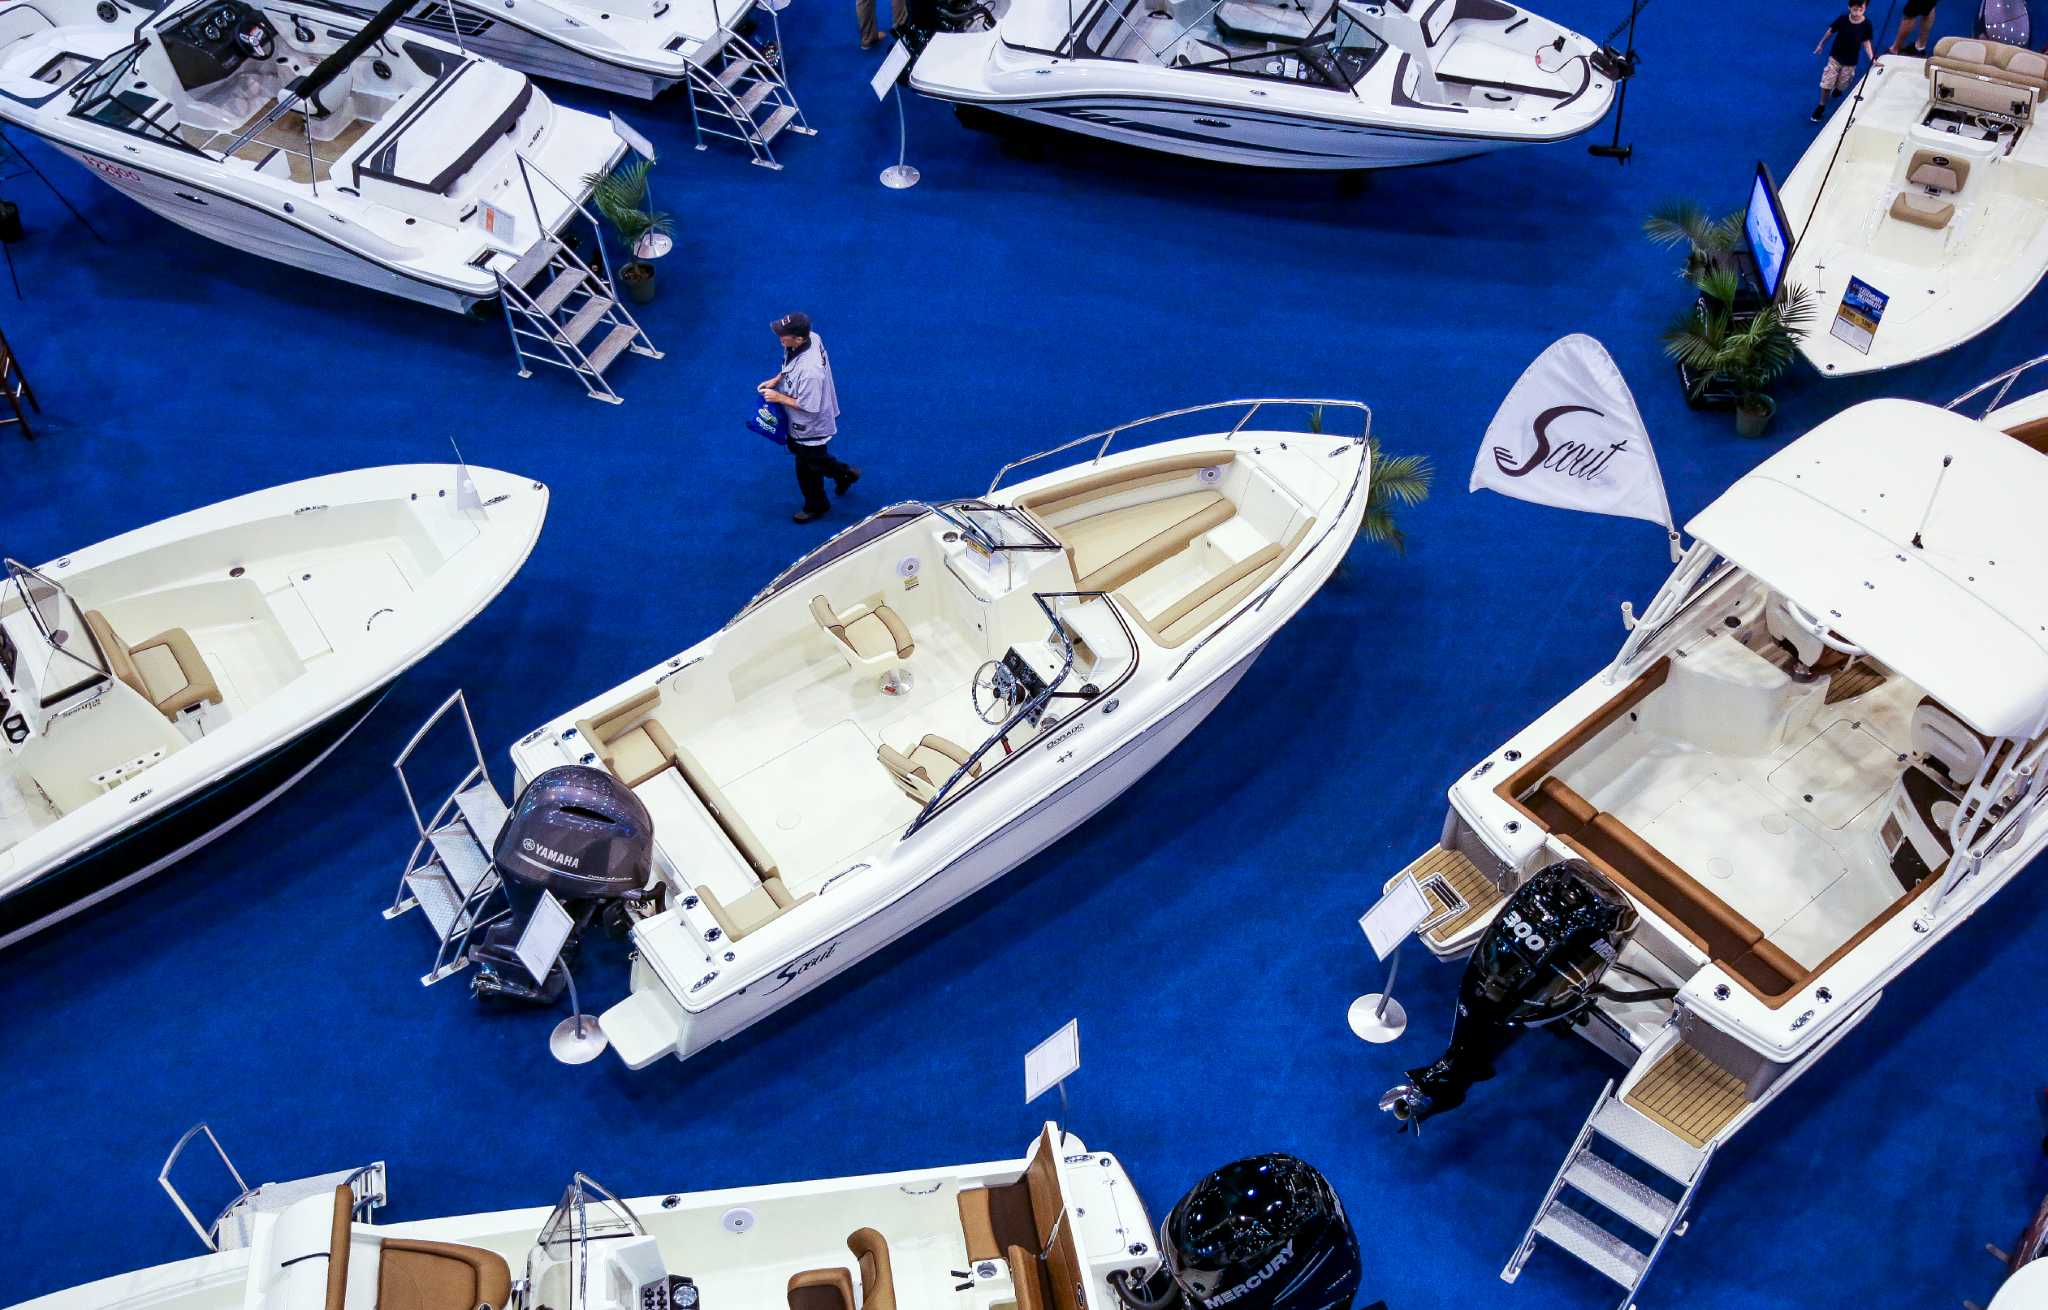 62nd annual Houston Boat Show opens Friday